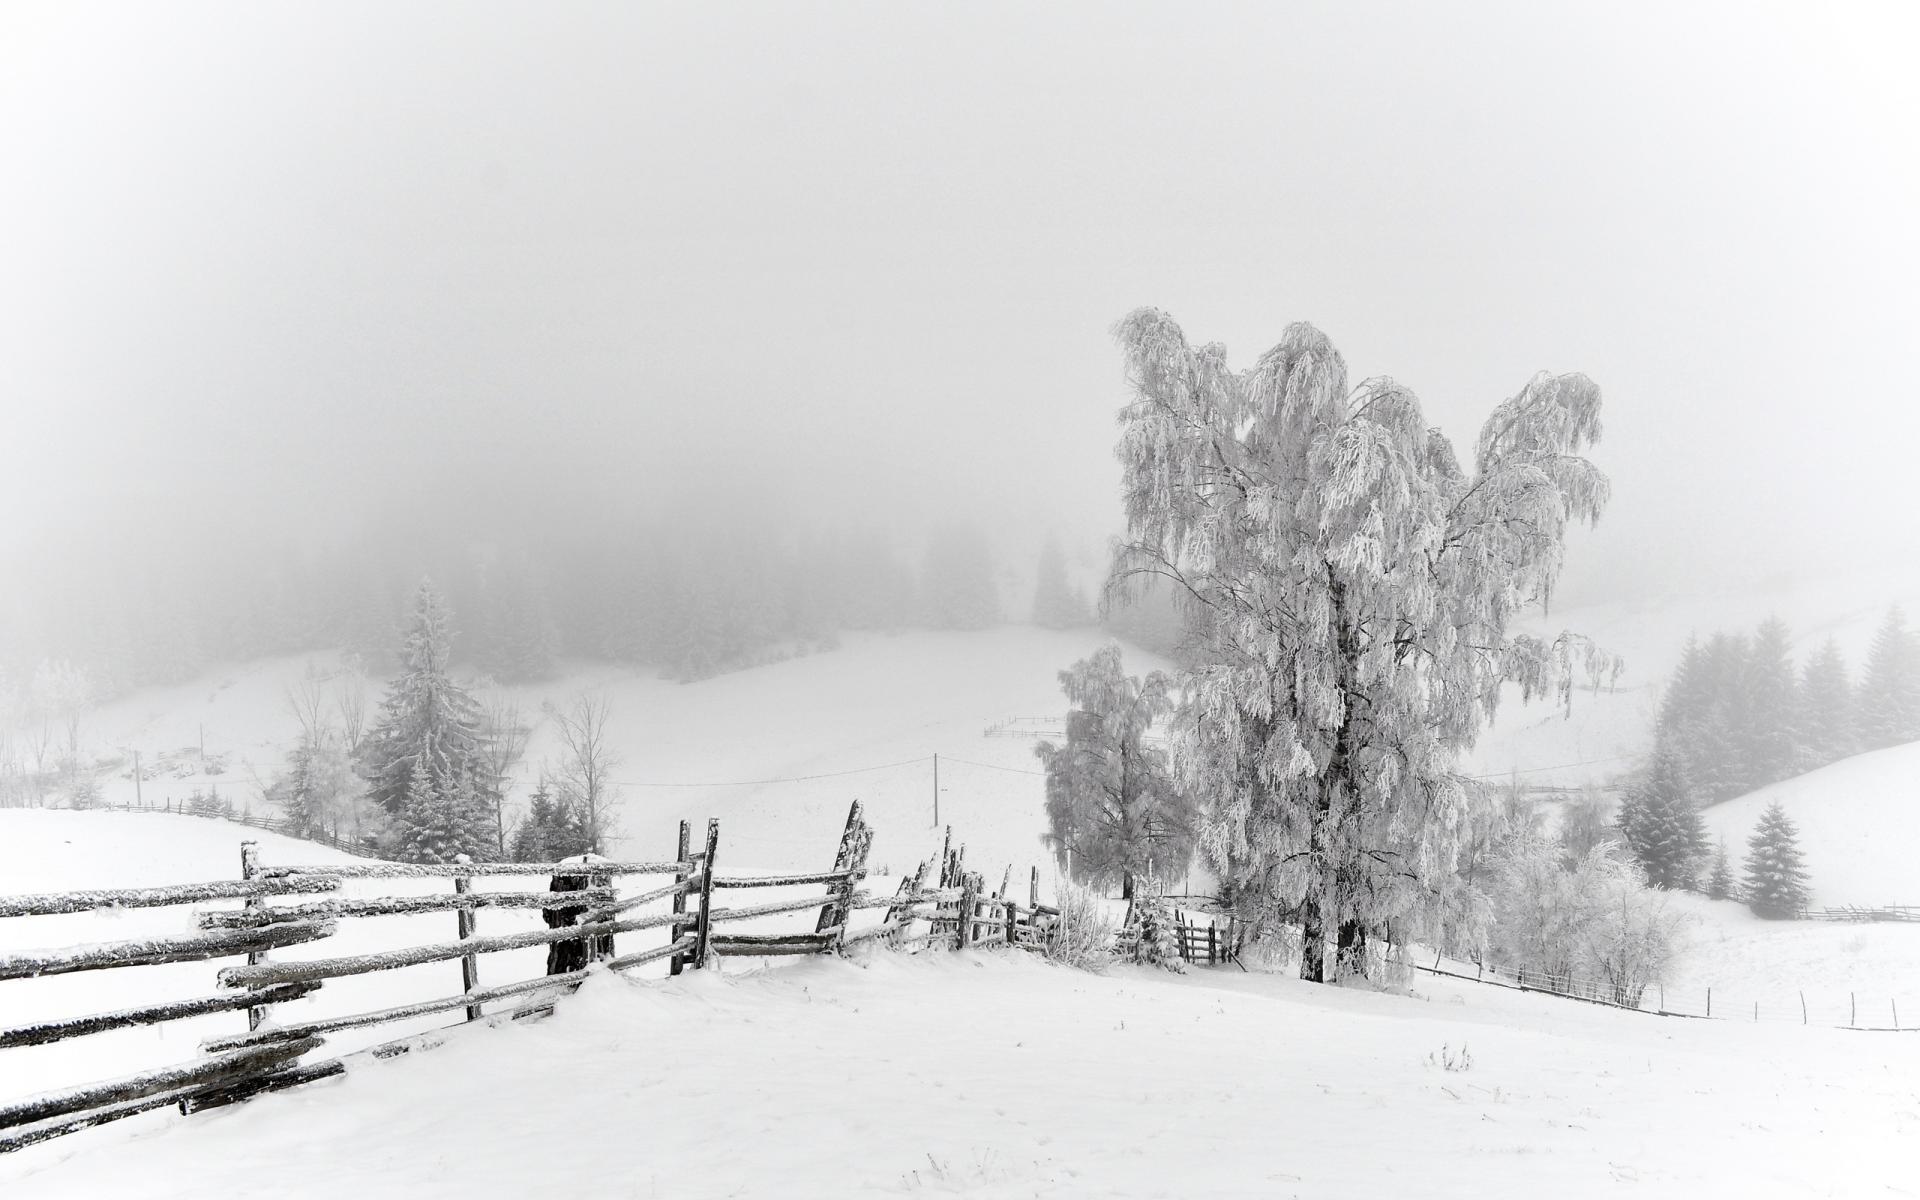 nature, Landscapes, Fence, Fields, Trees, Winter, Snow, Seasons, White, Bright, Cold, Snowing, Fog, Mist, Haze, Scenic Wallpaper